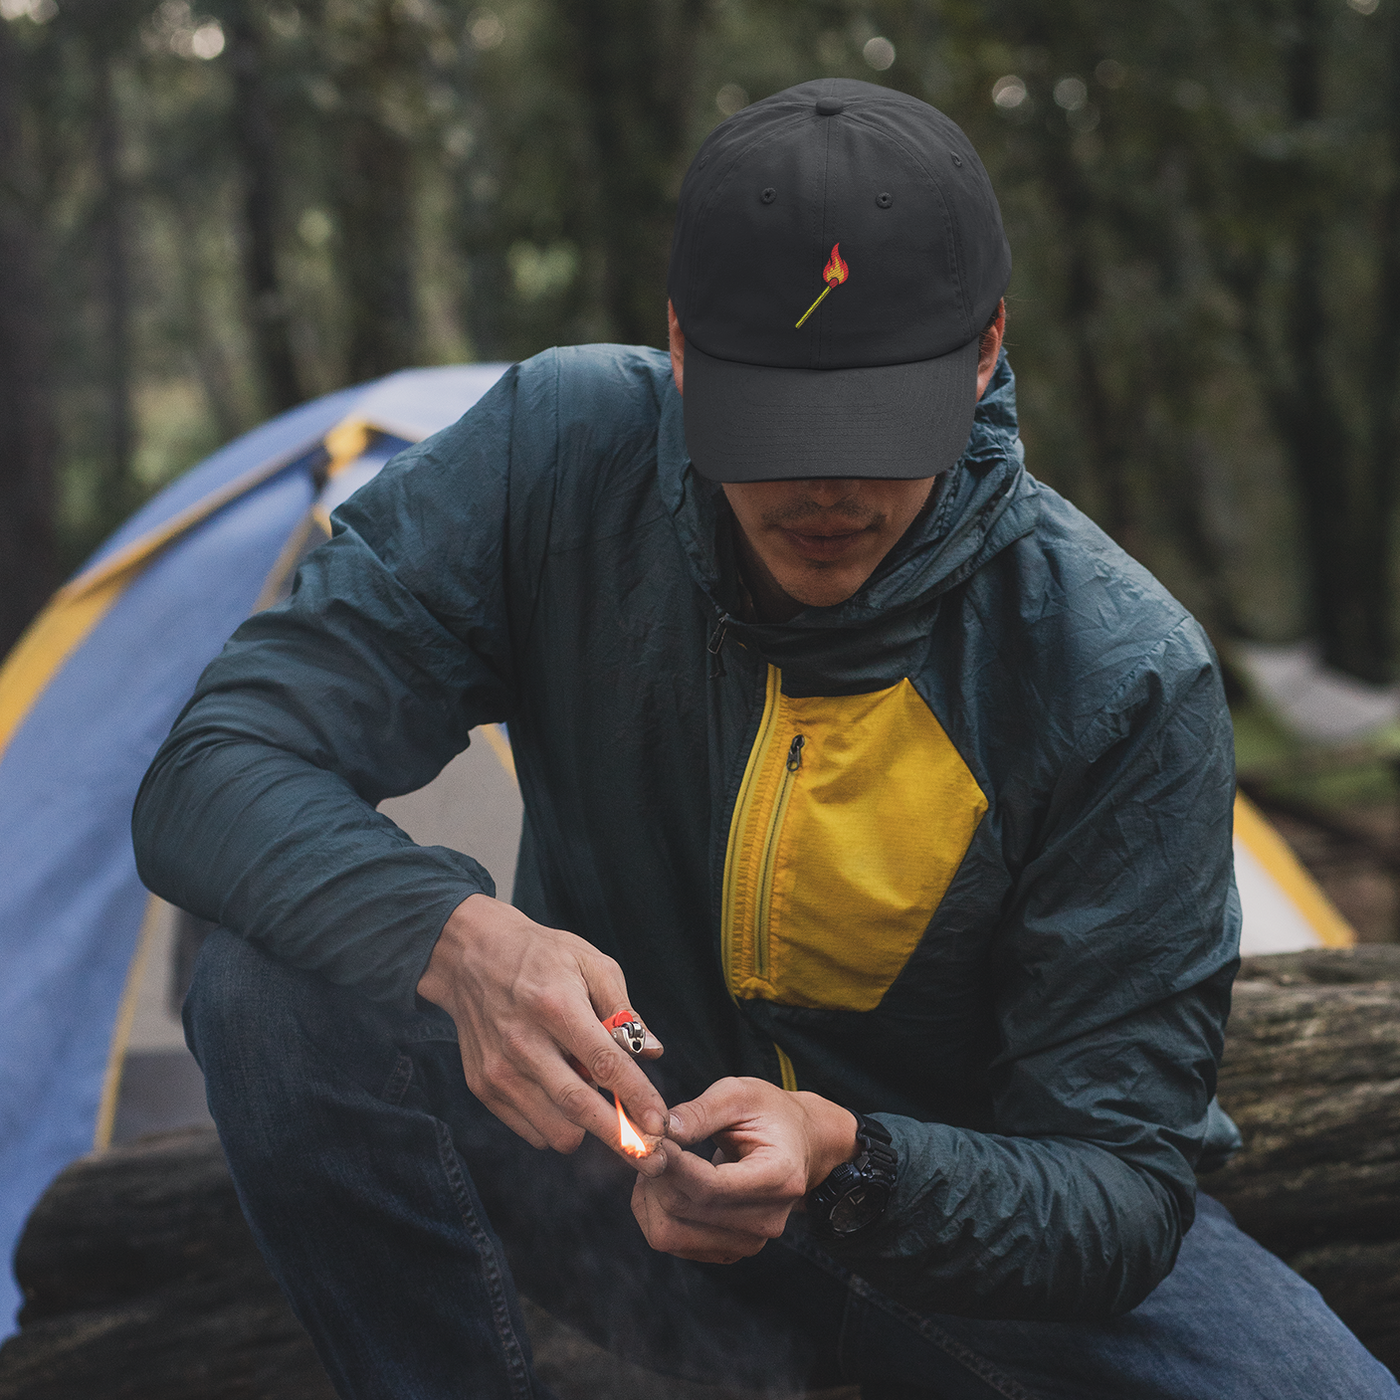 The Fire Starter | Camping Fashion Dad Cap